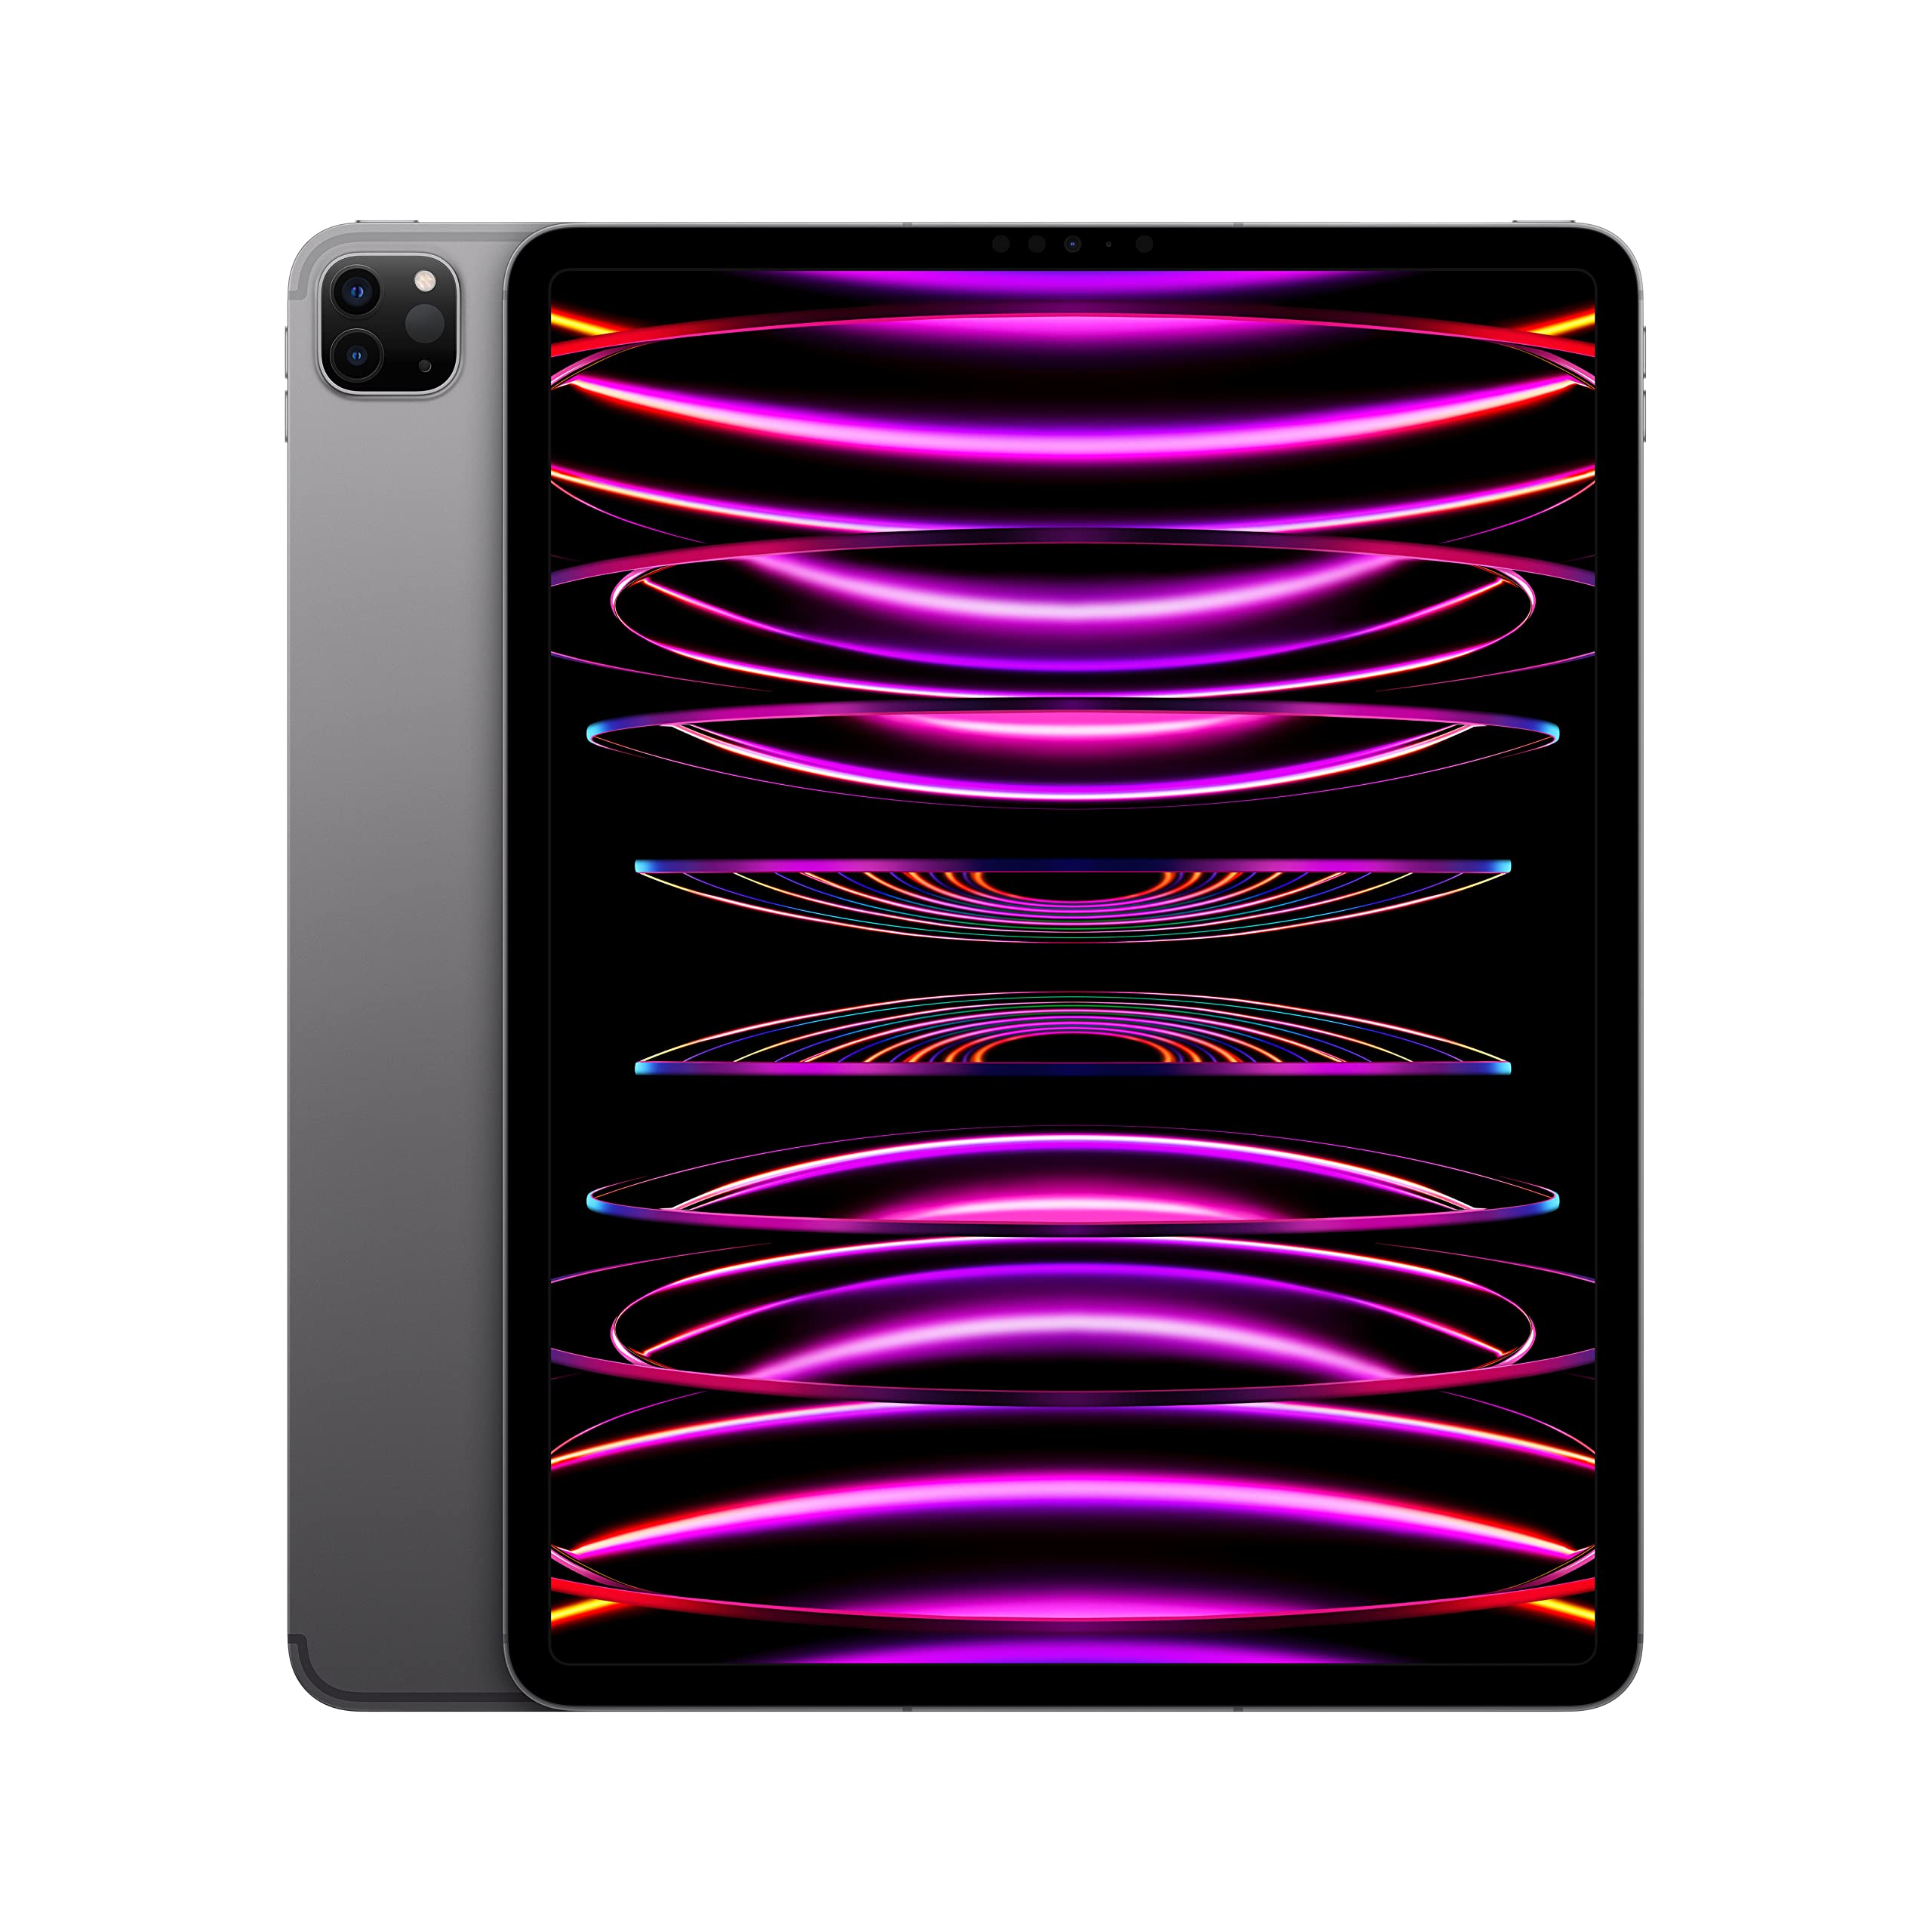 Apple iPad Pro 12.9-inch (6th Generation): with M2 chip, Liquid Retina XDR Display, 1TB, Wi-Fi 6E + 5G Cellular, 12MP front/12MP and 10MP Back Cameras, Face ID, All-Day Battery Life – Space Gray